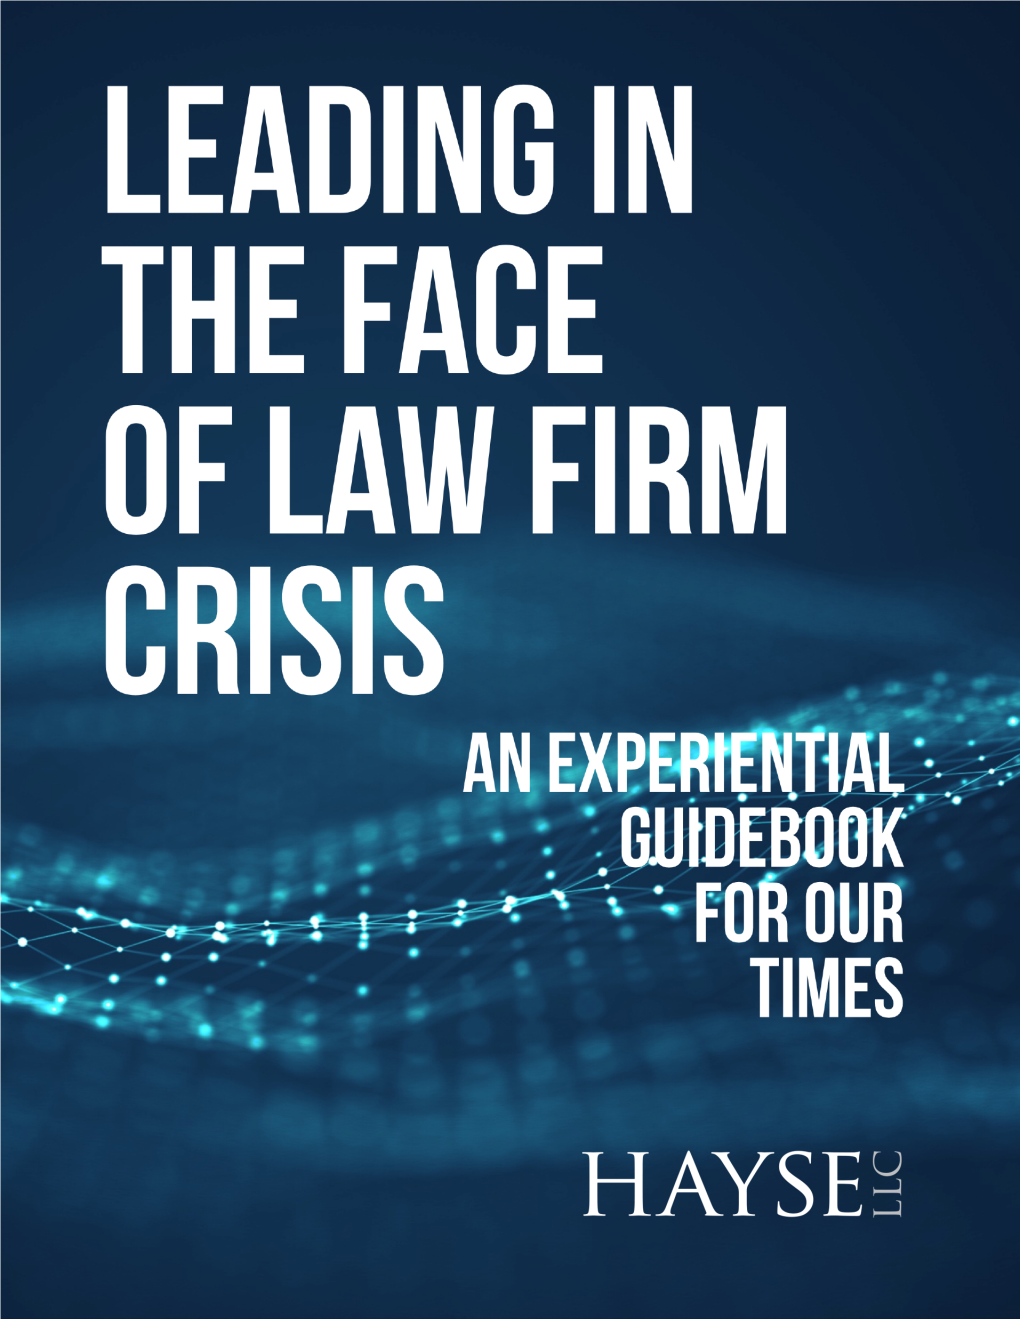 Managing Through Law Firm Crisis